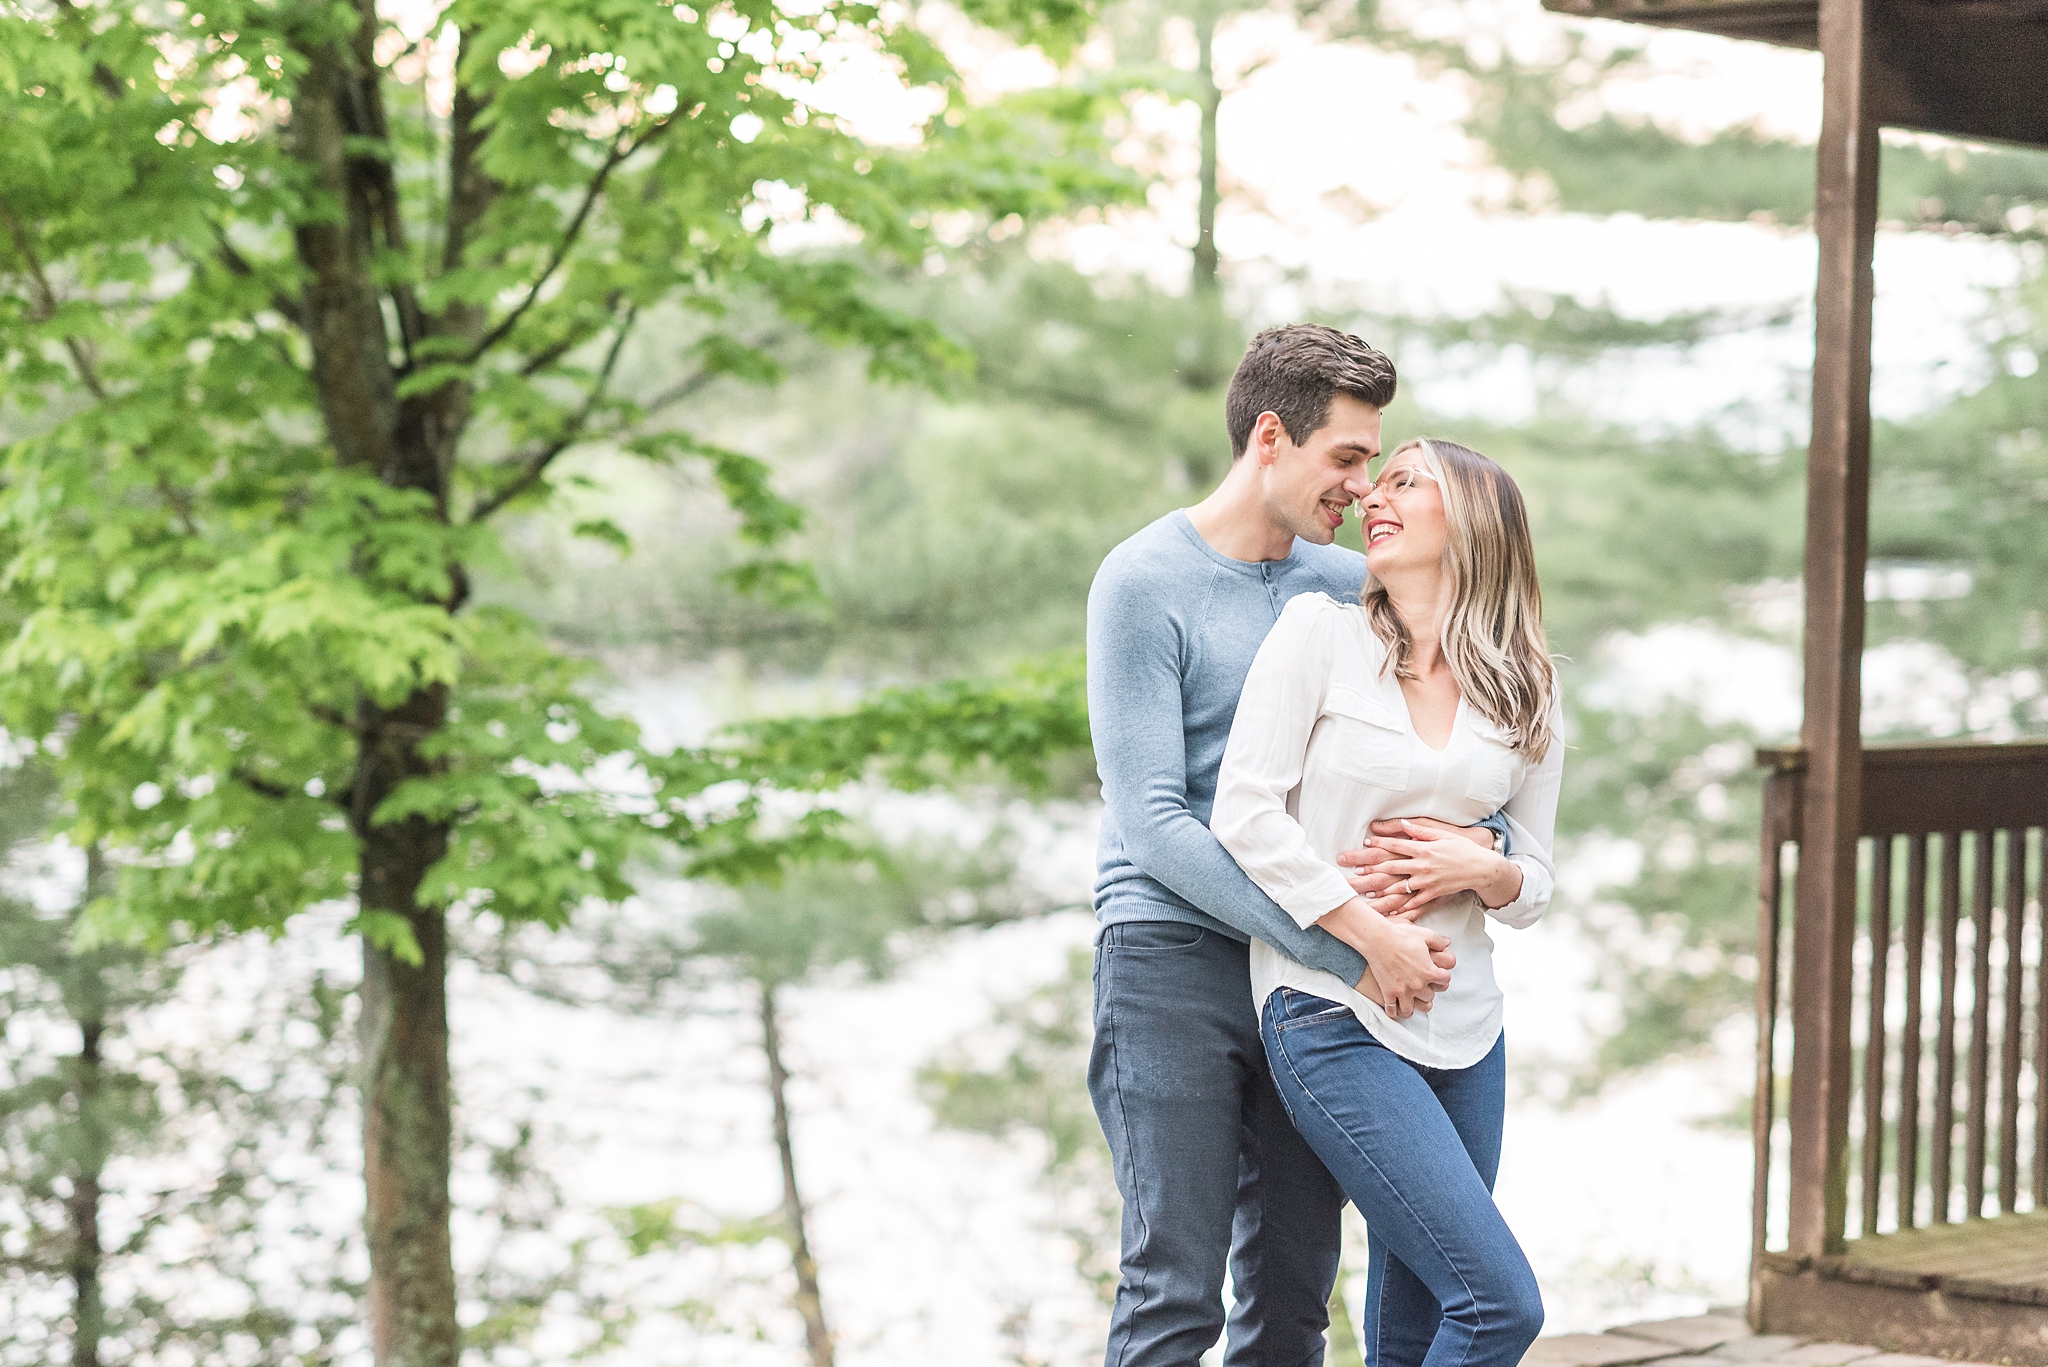 Spring Sharbot Lake Engagement Photos | Ottawa Engagement Photos | Cottage Sharbot Lake Engagement Session Get more inspiration from this adorable waterside engagement session. #ottawaengagement #weddingphotography #ottawaweddings